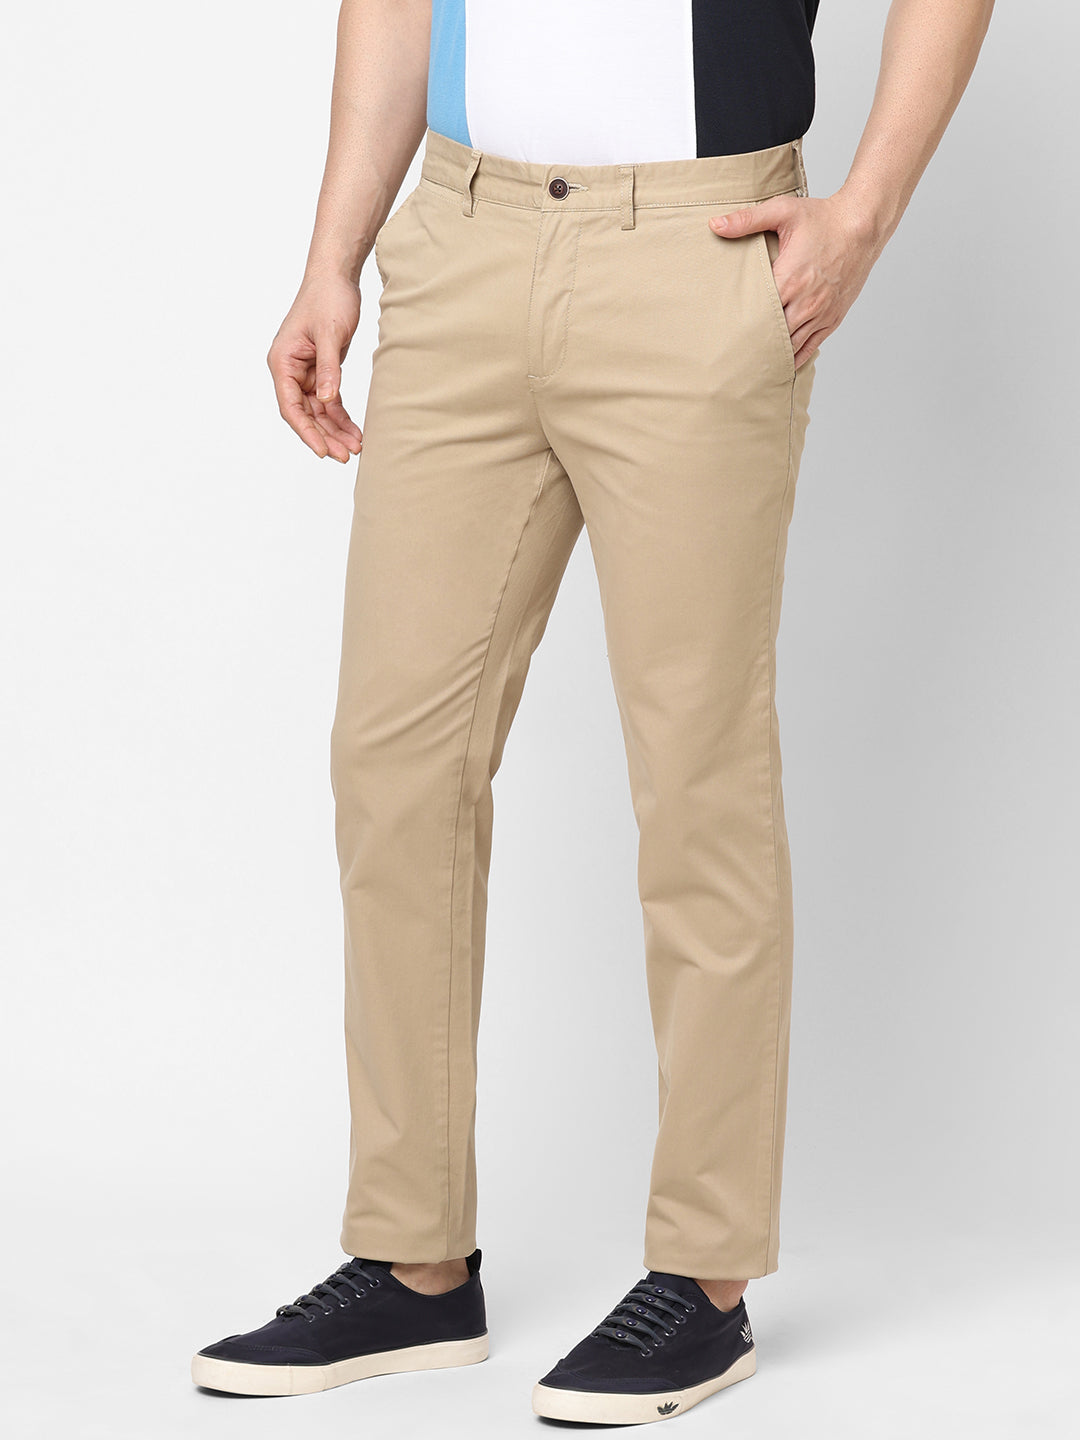 classic organic cotton jeans in a regular fit, these mens